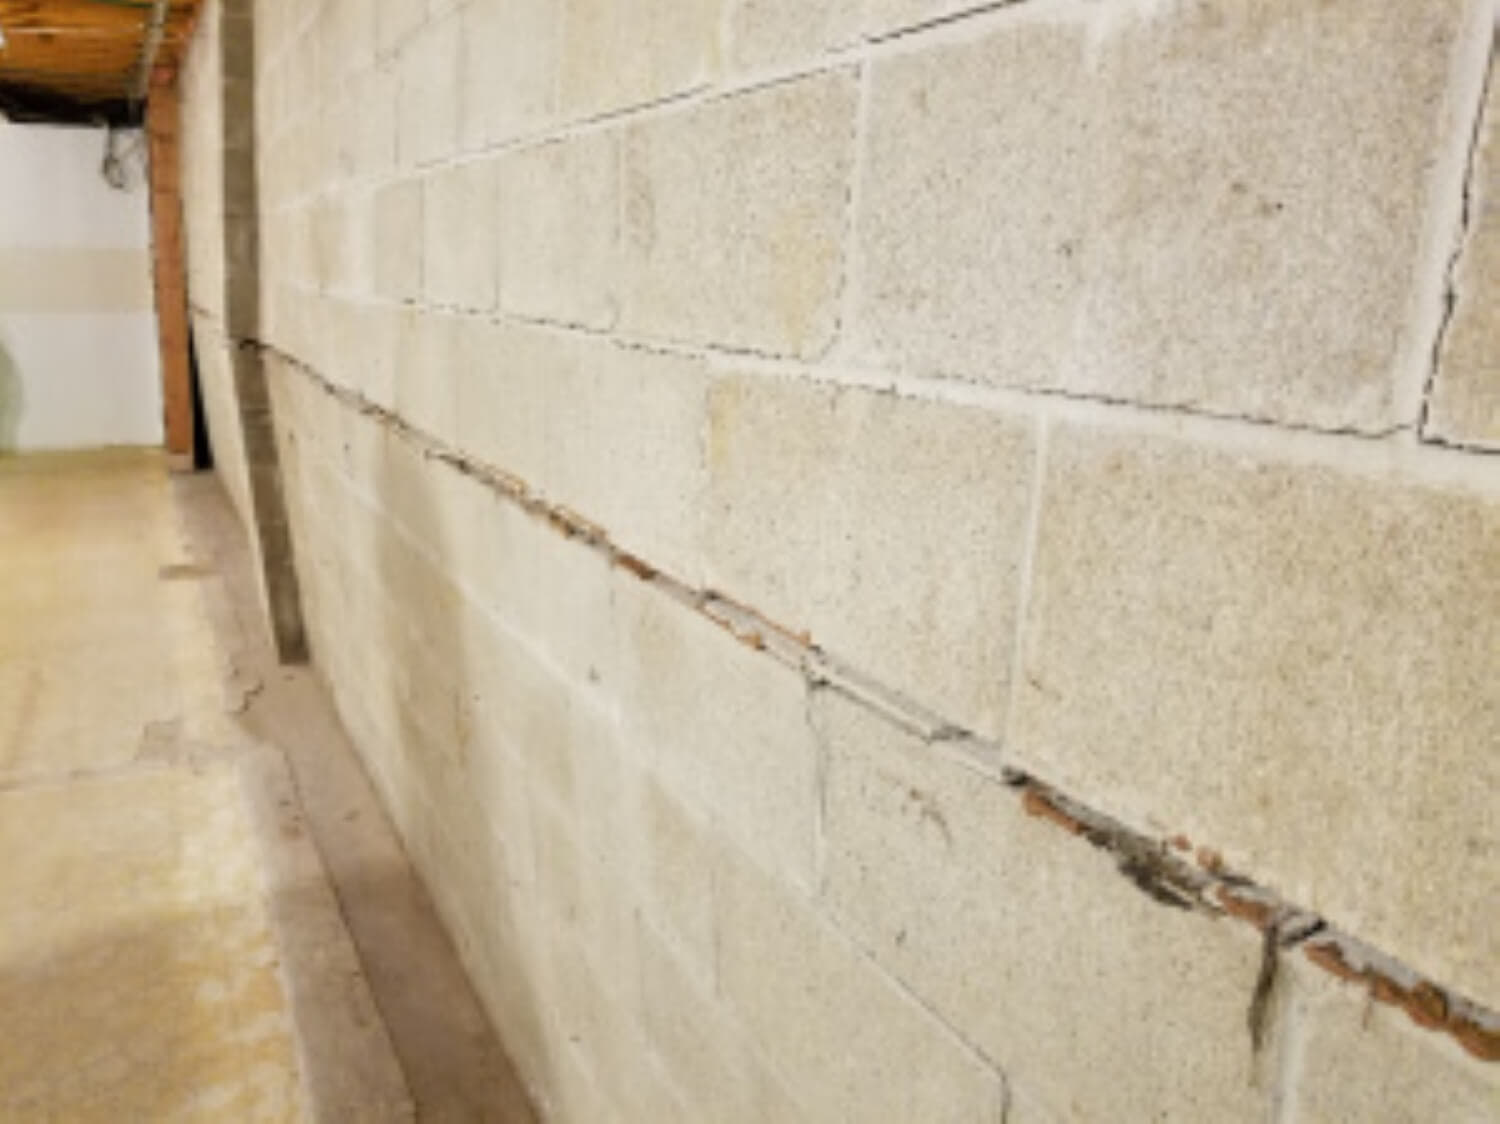 crack in block concrete wall, wall bowing inward